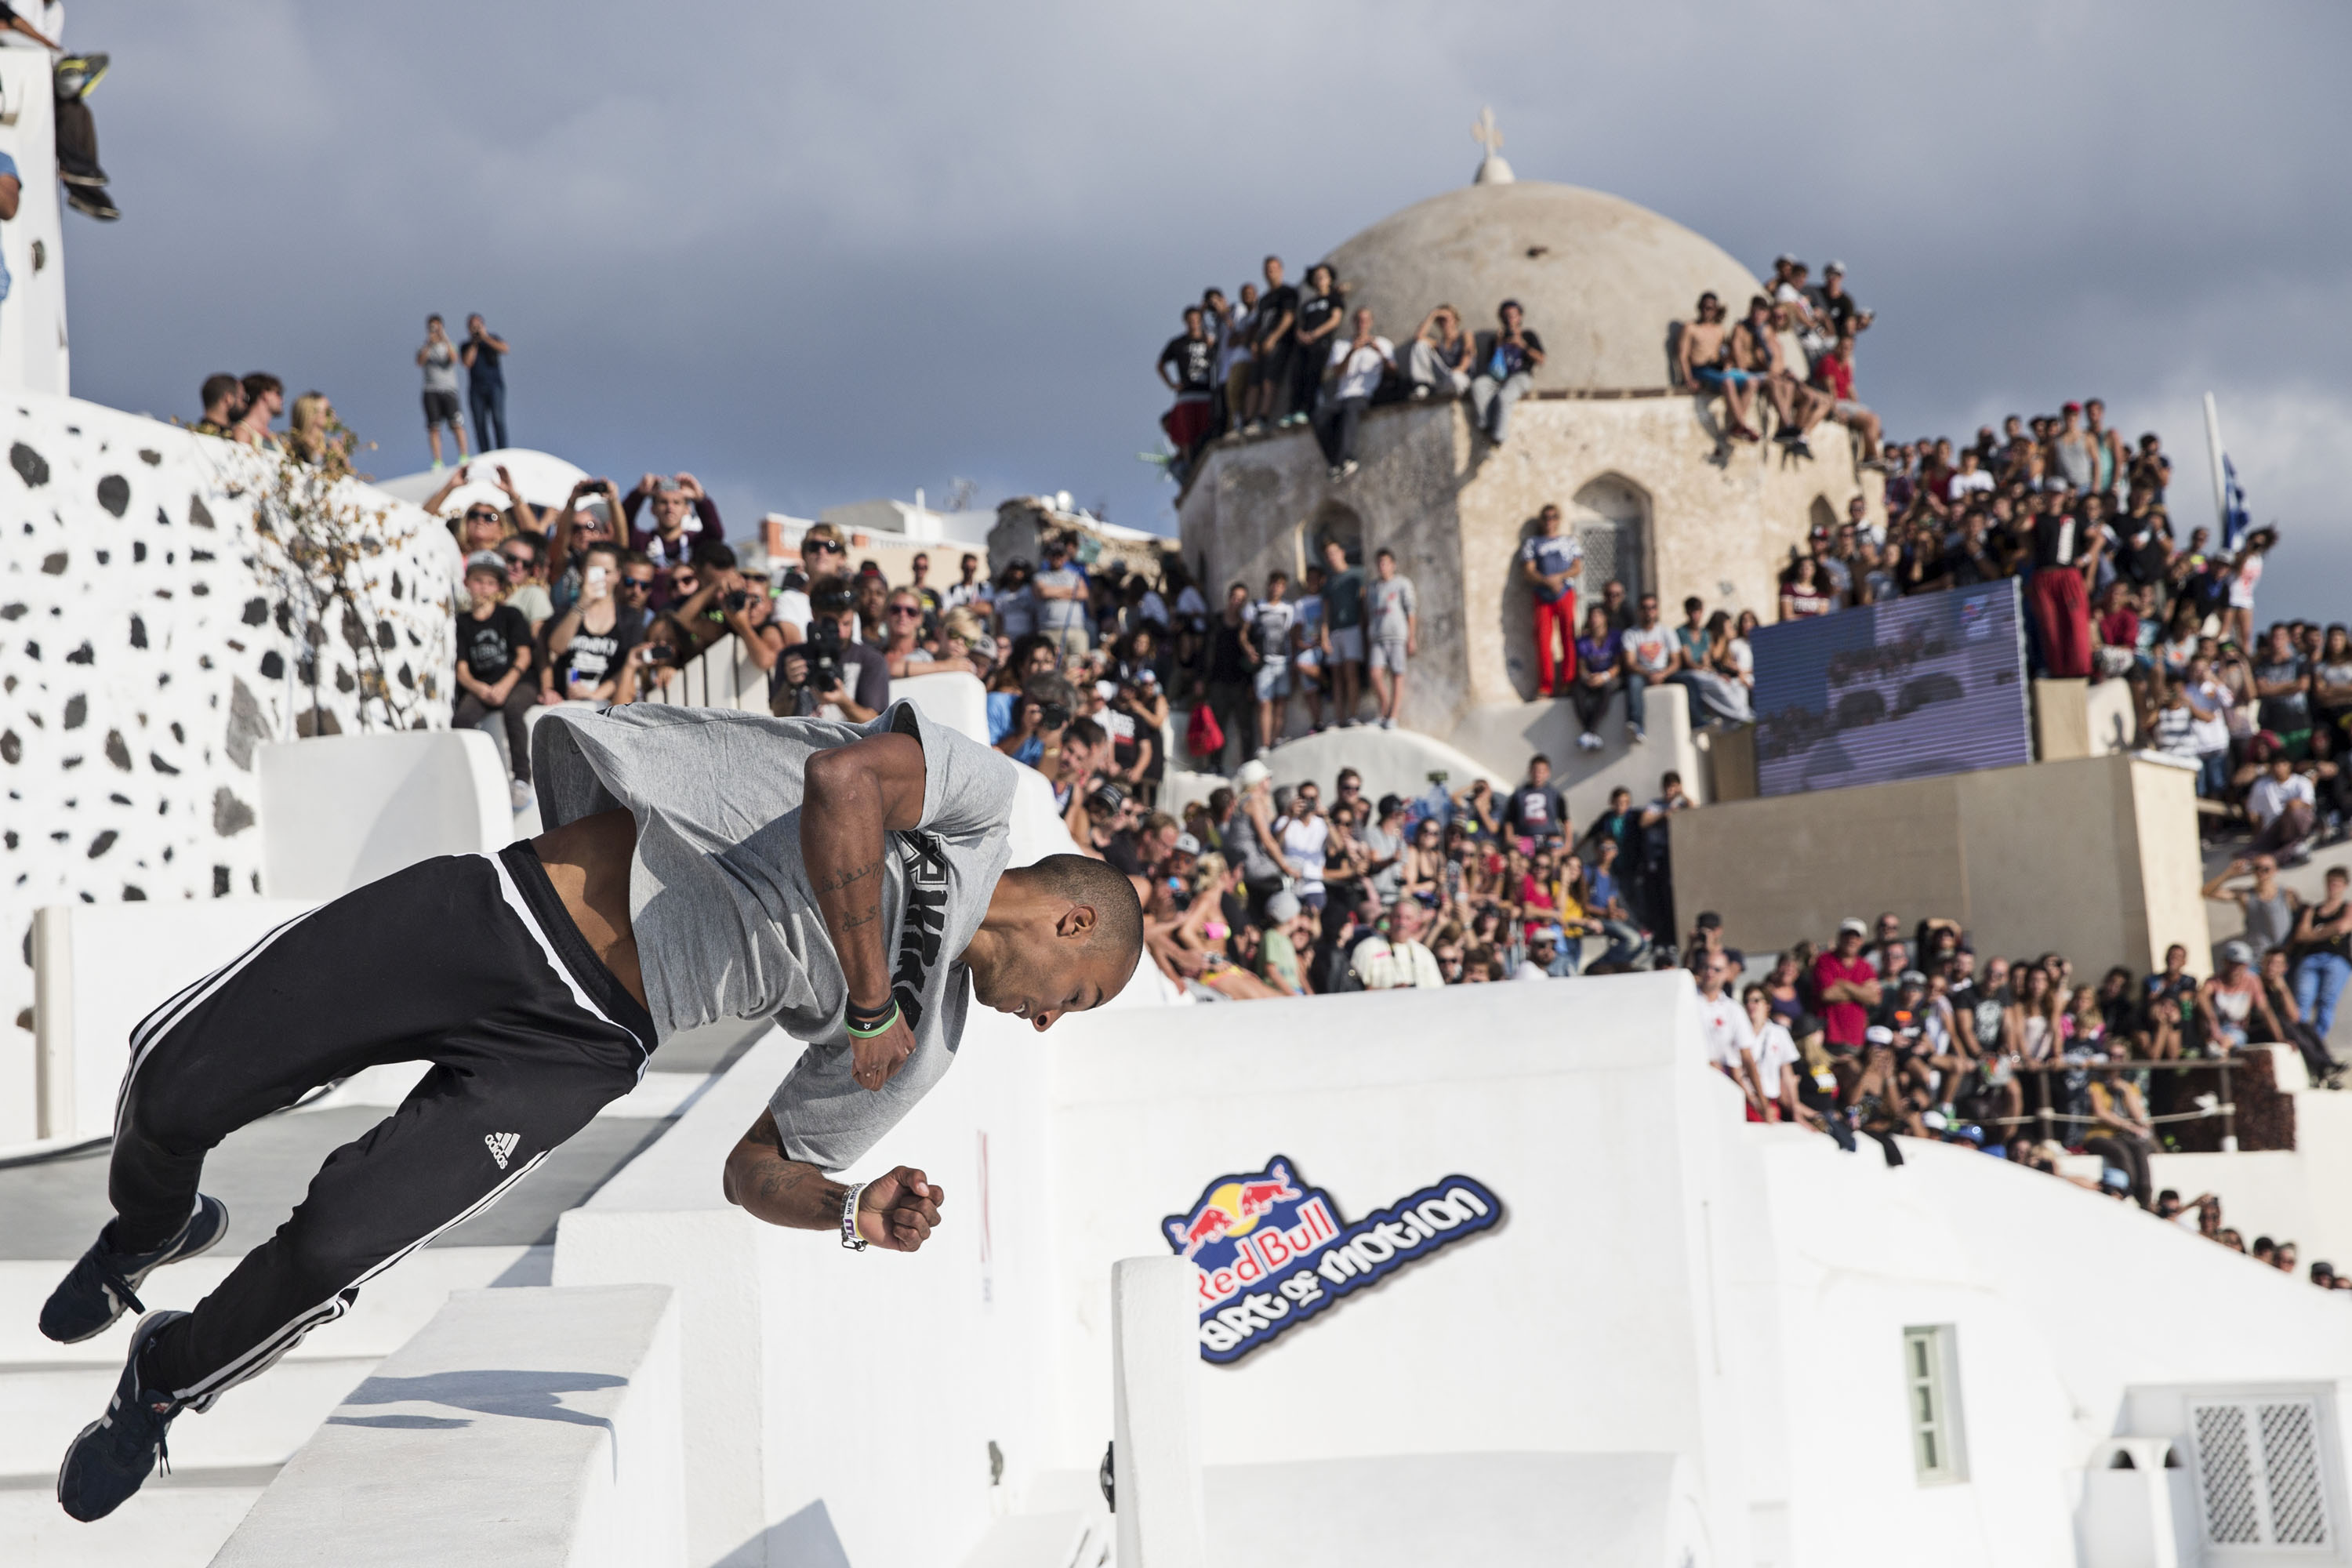 Achraf Dibani of Marocco performs during the finals at the "Red Bull Art of Motion" freerunning competition on Santorini Island, Greece on October 3, 2015